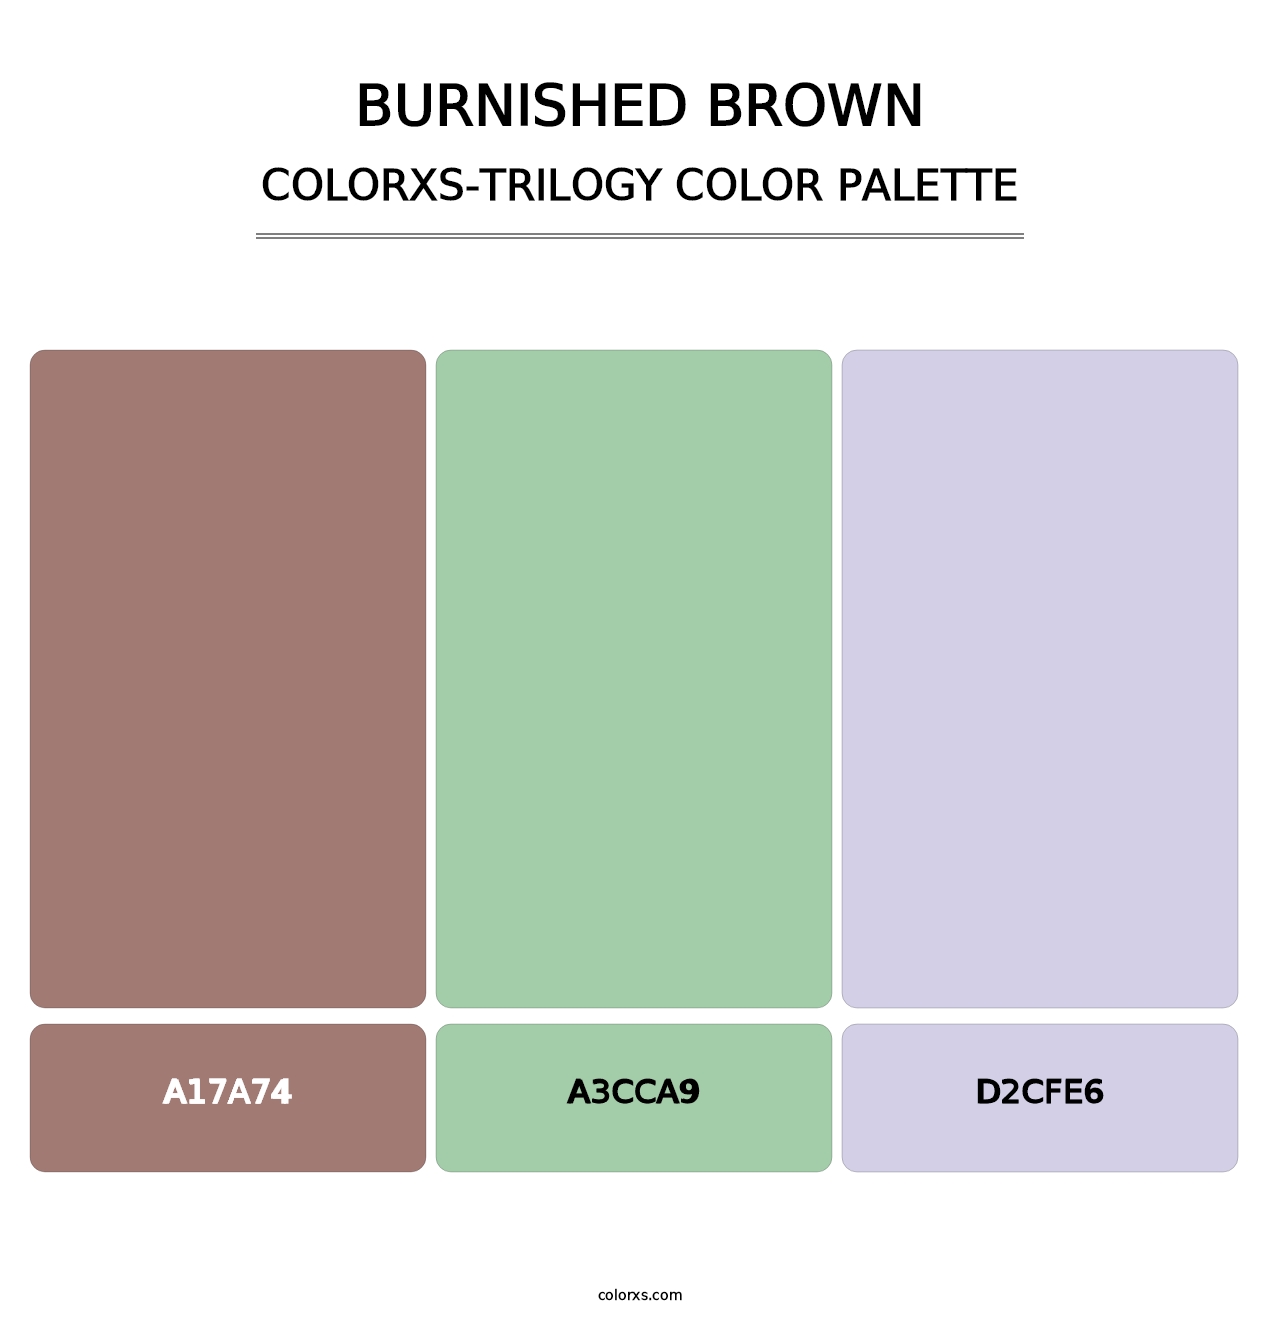 Burnished Brown - Colorxs Trilogy Palette